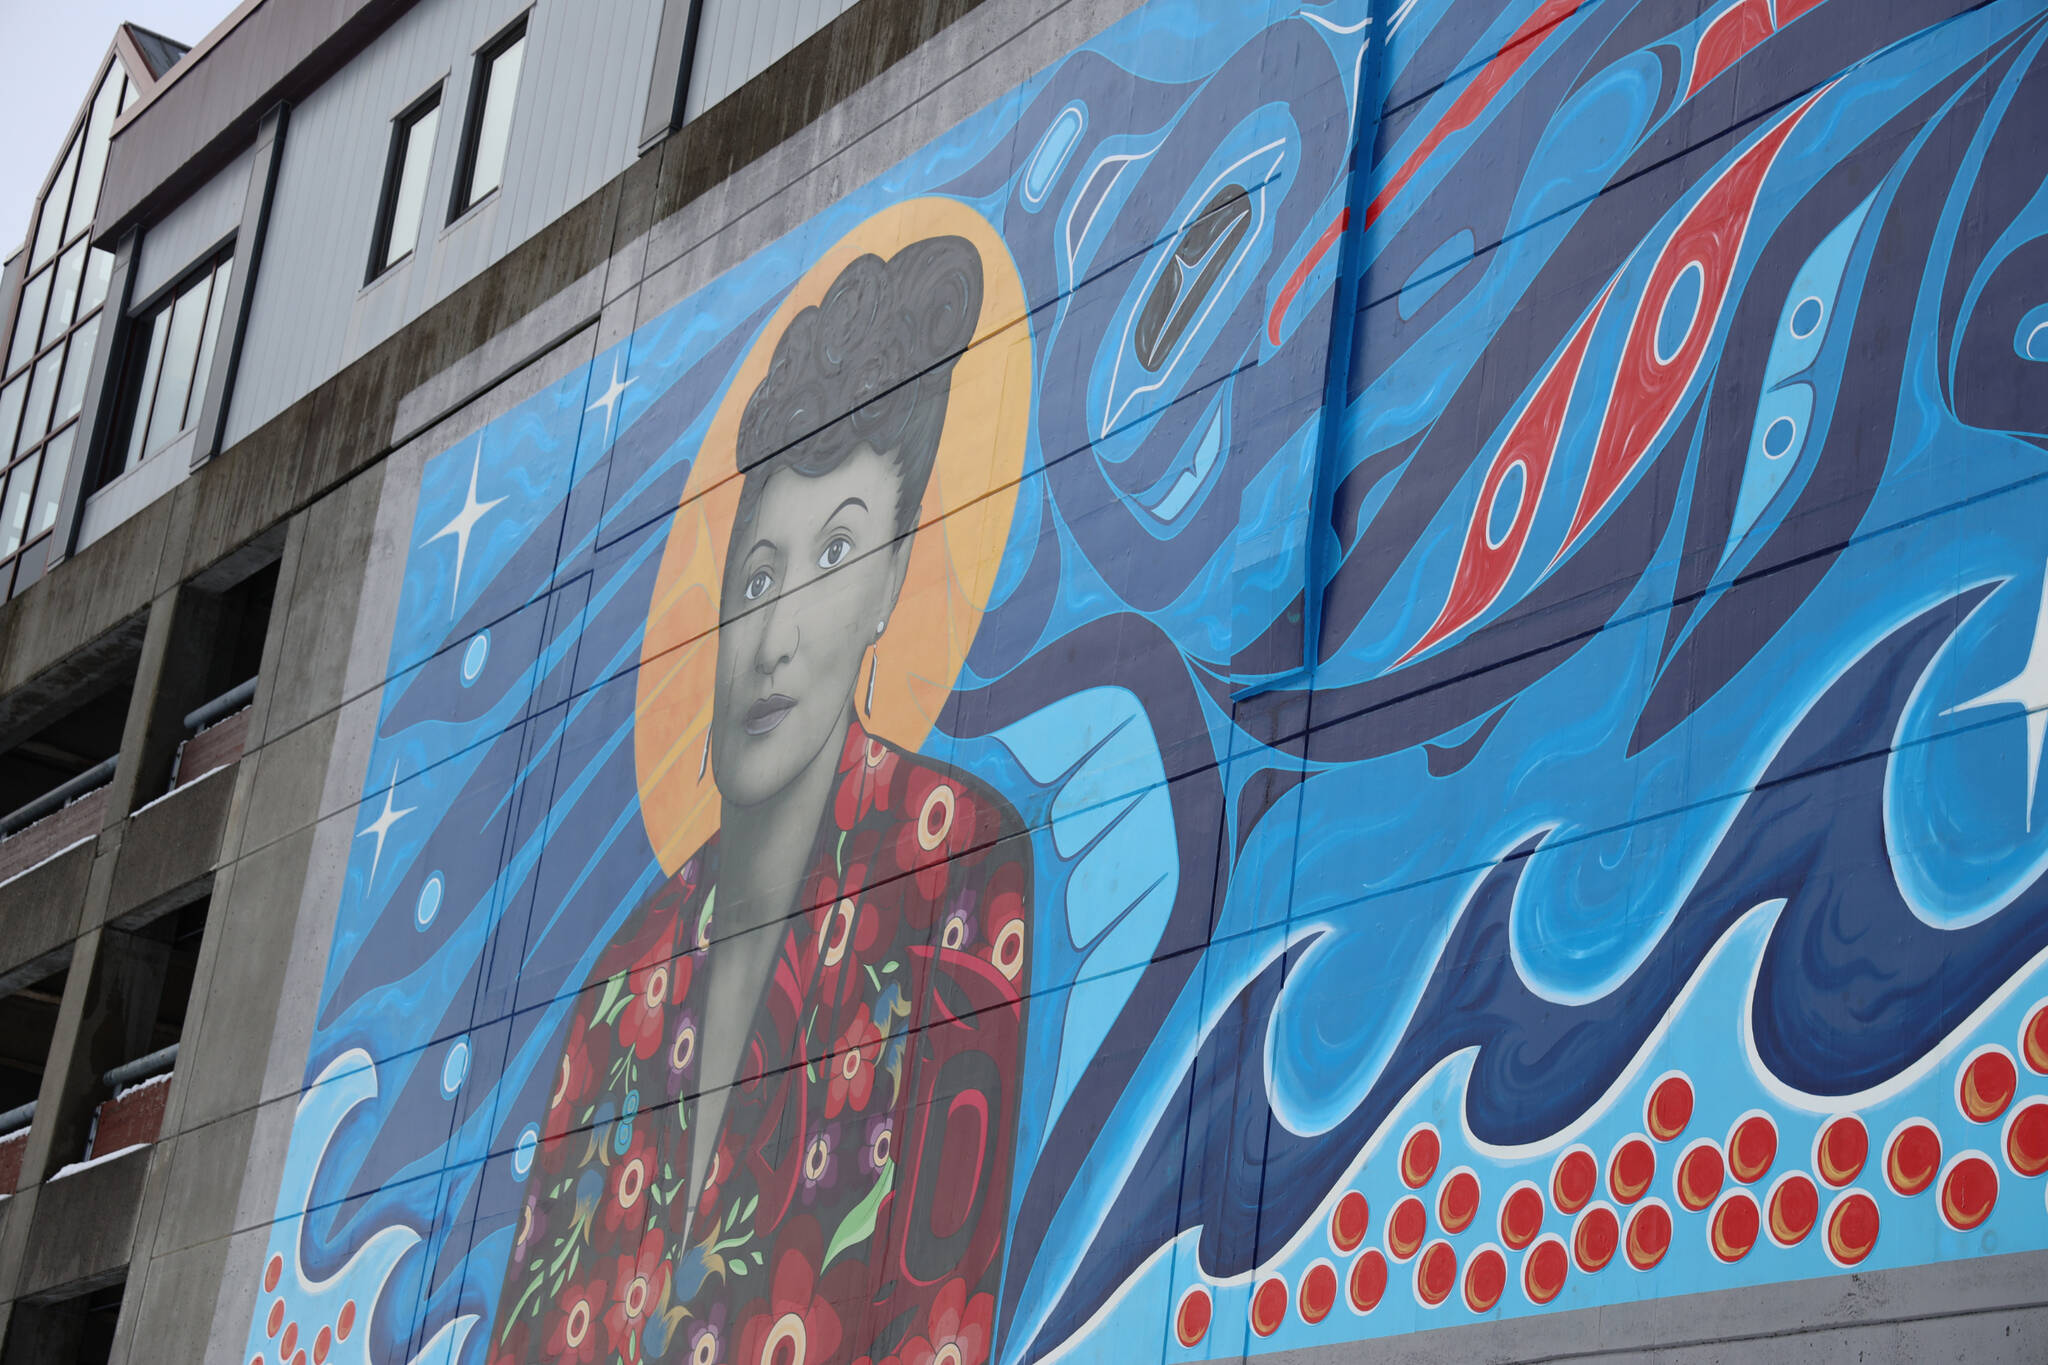 This photo shows the Elizabeth Peratrovich mural at the Downtown Public Library and Marine Parking Garage.. This Thursday, Feb. 16, the state will observes Elizabeth Peratrovich Day to recognize and honor her for her contributions to anti-discrimination in the state. (Clarise Larson / Juneau Empire)